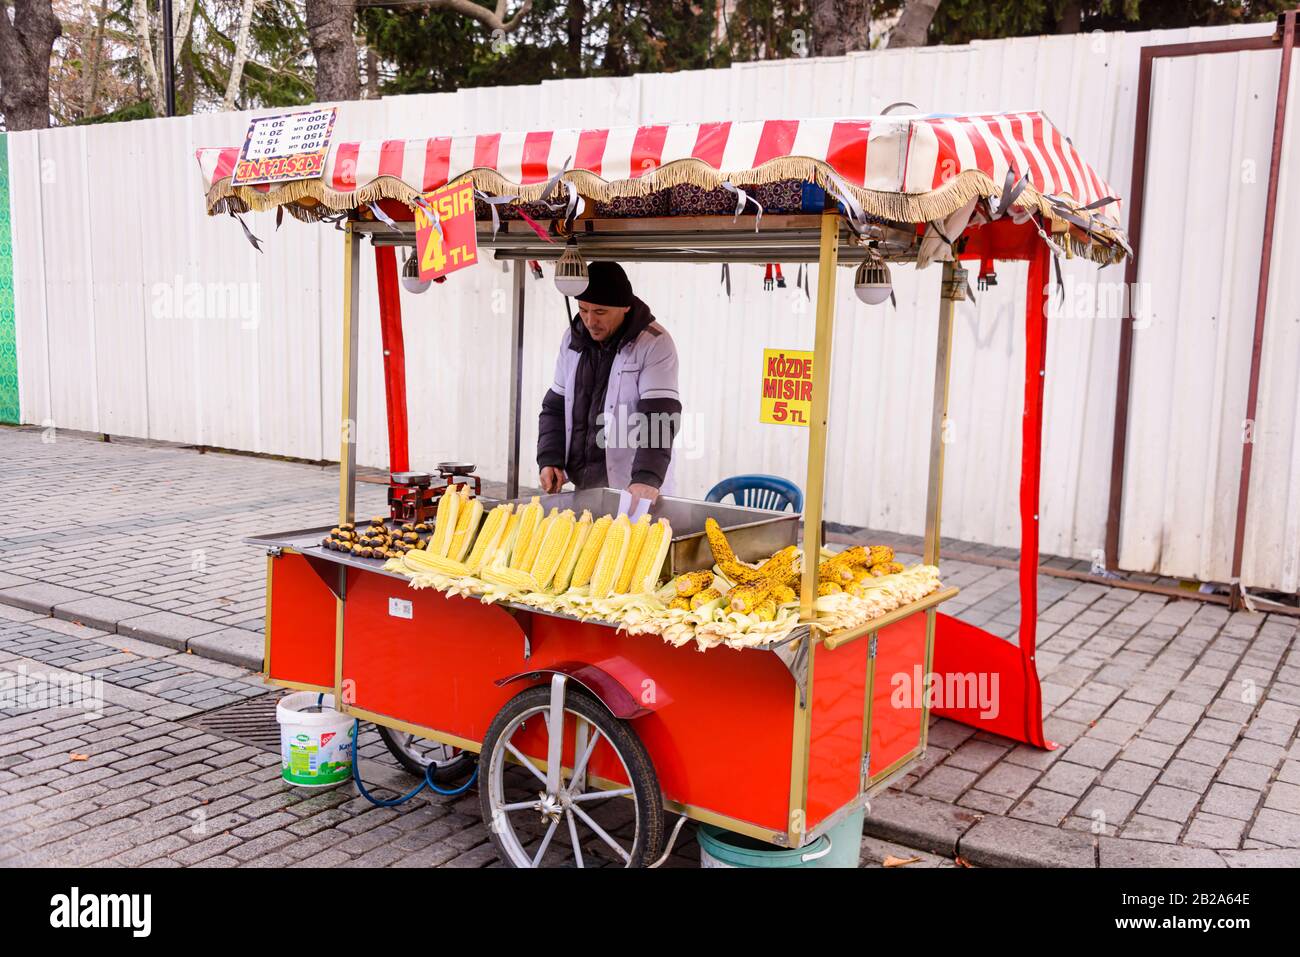 Roasted sweetcorn on sale at a traditional street cart, Istanbul, Turkey Stock Photo